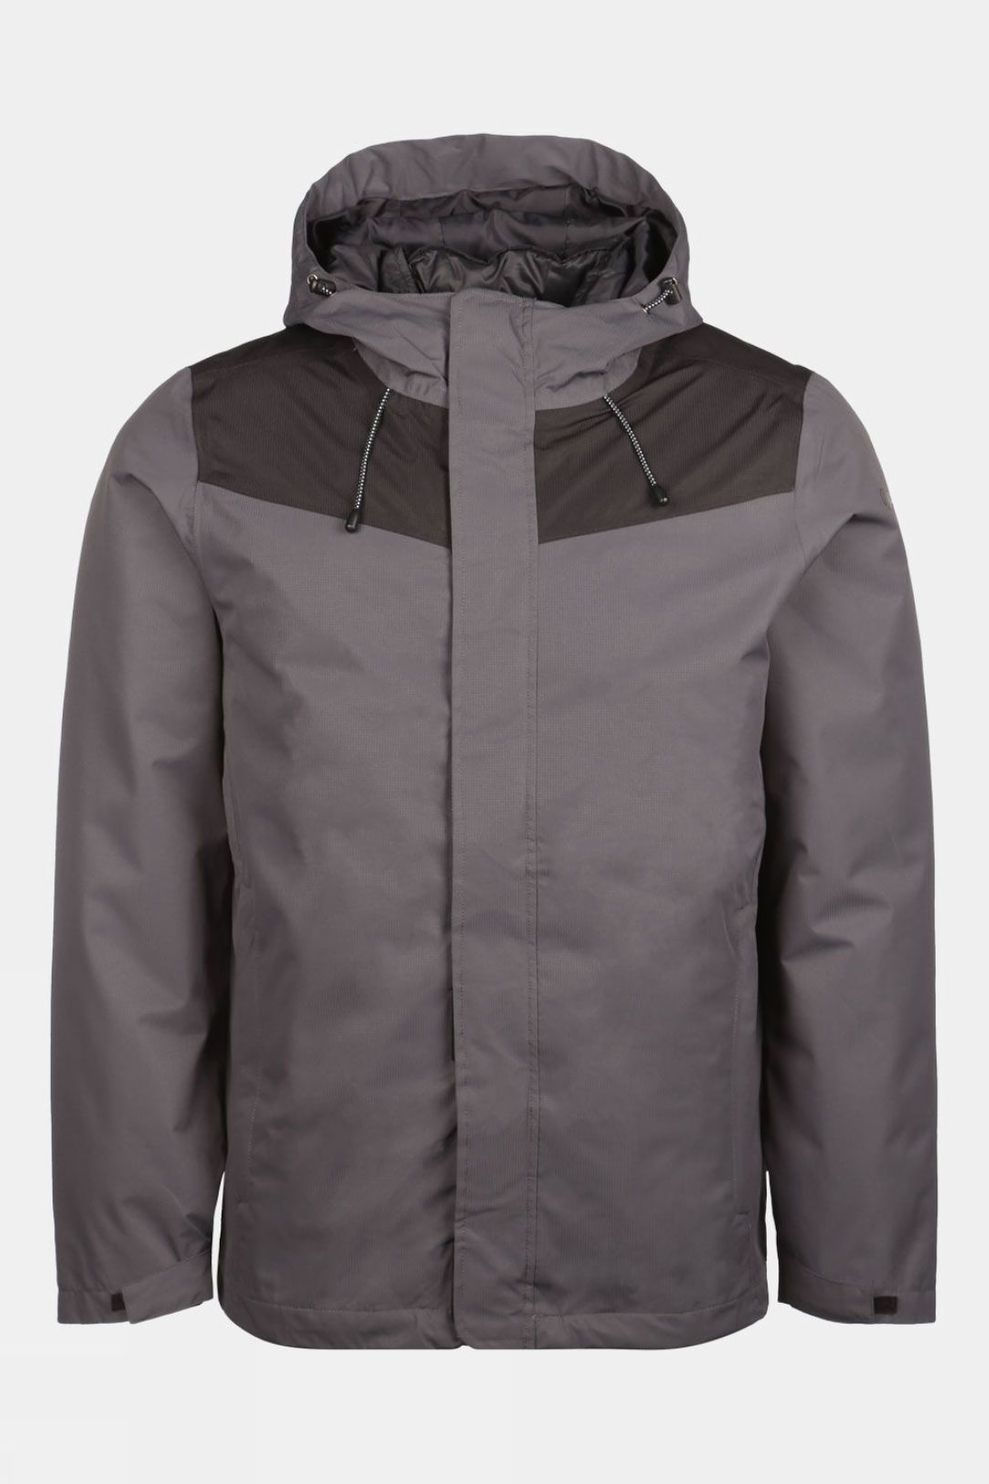 Our Planet Mens Cambrium 3in1 Jacket